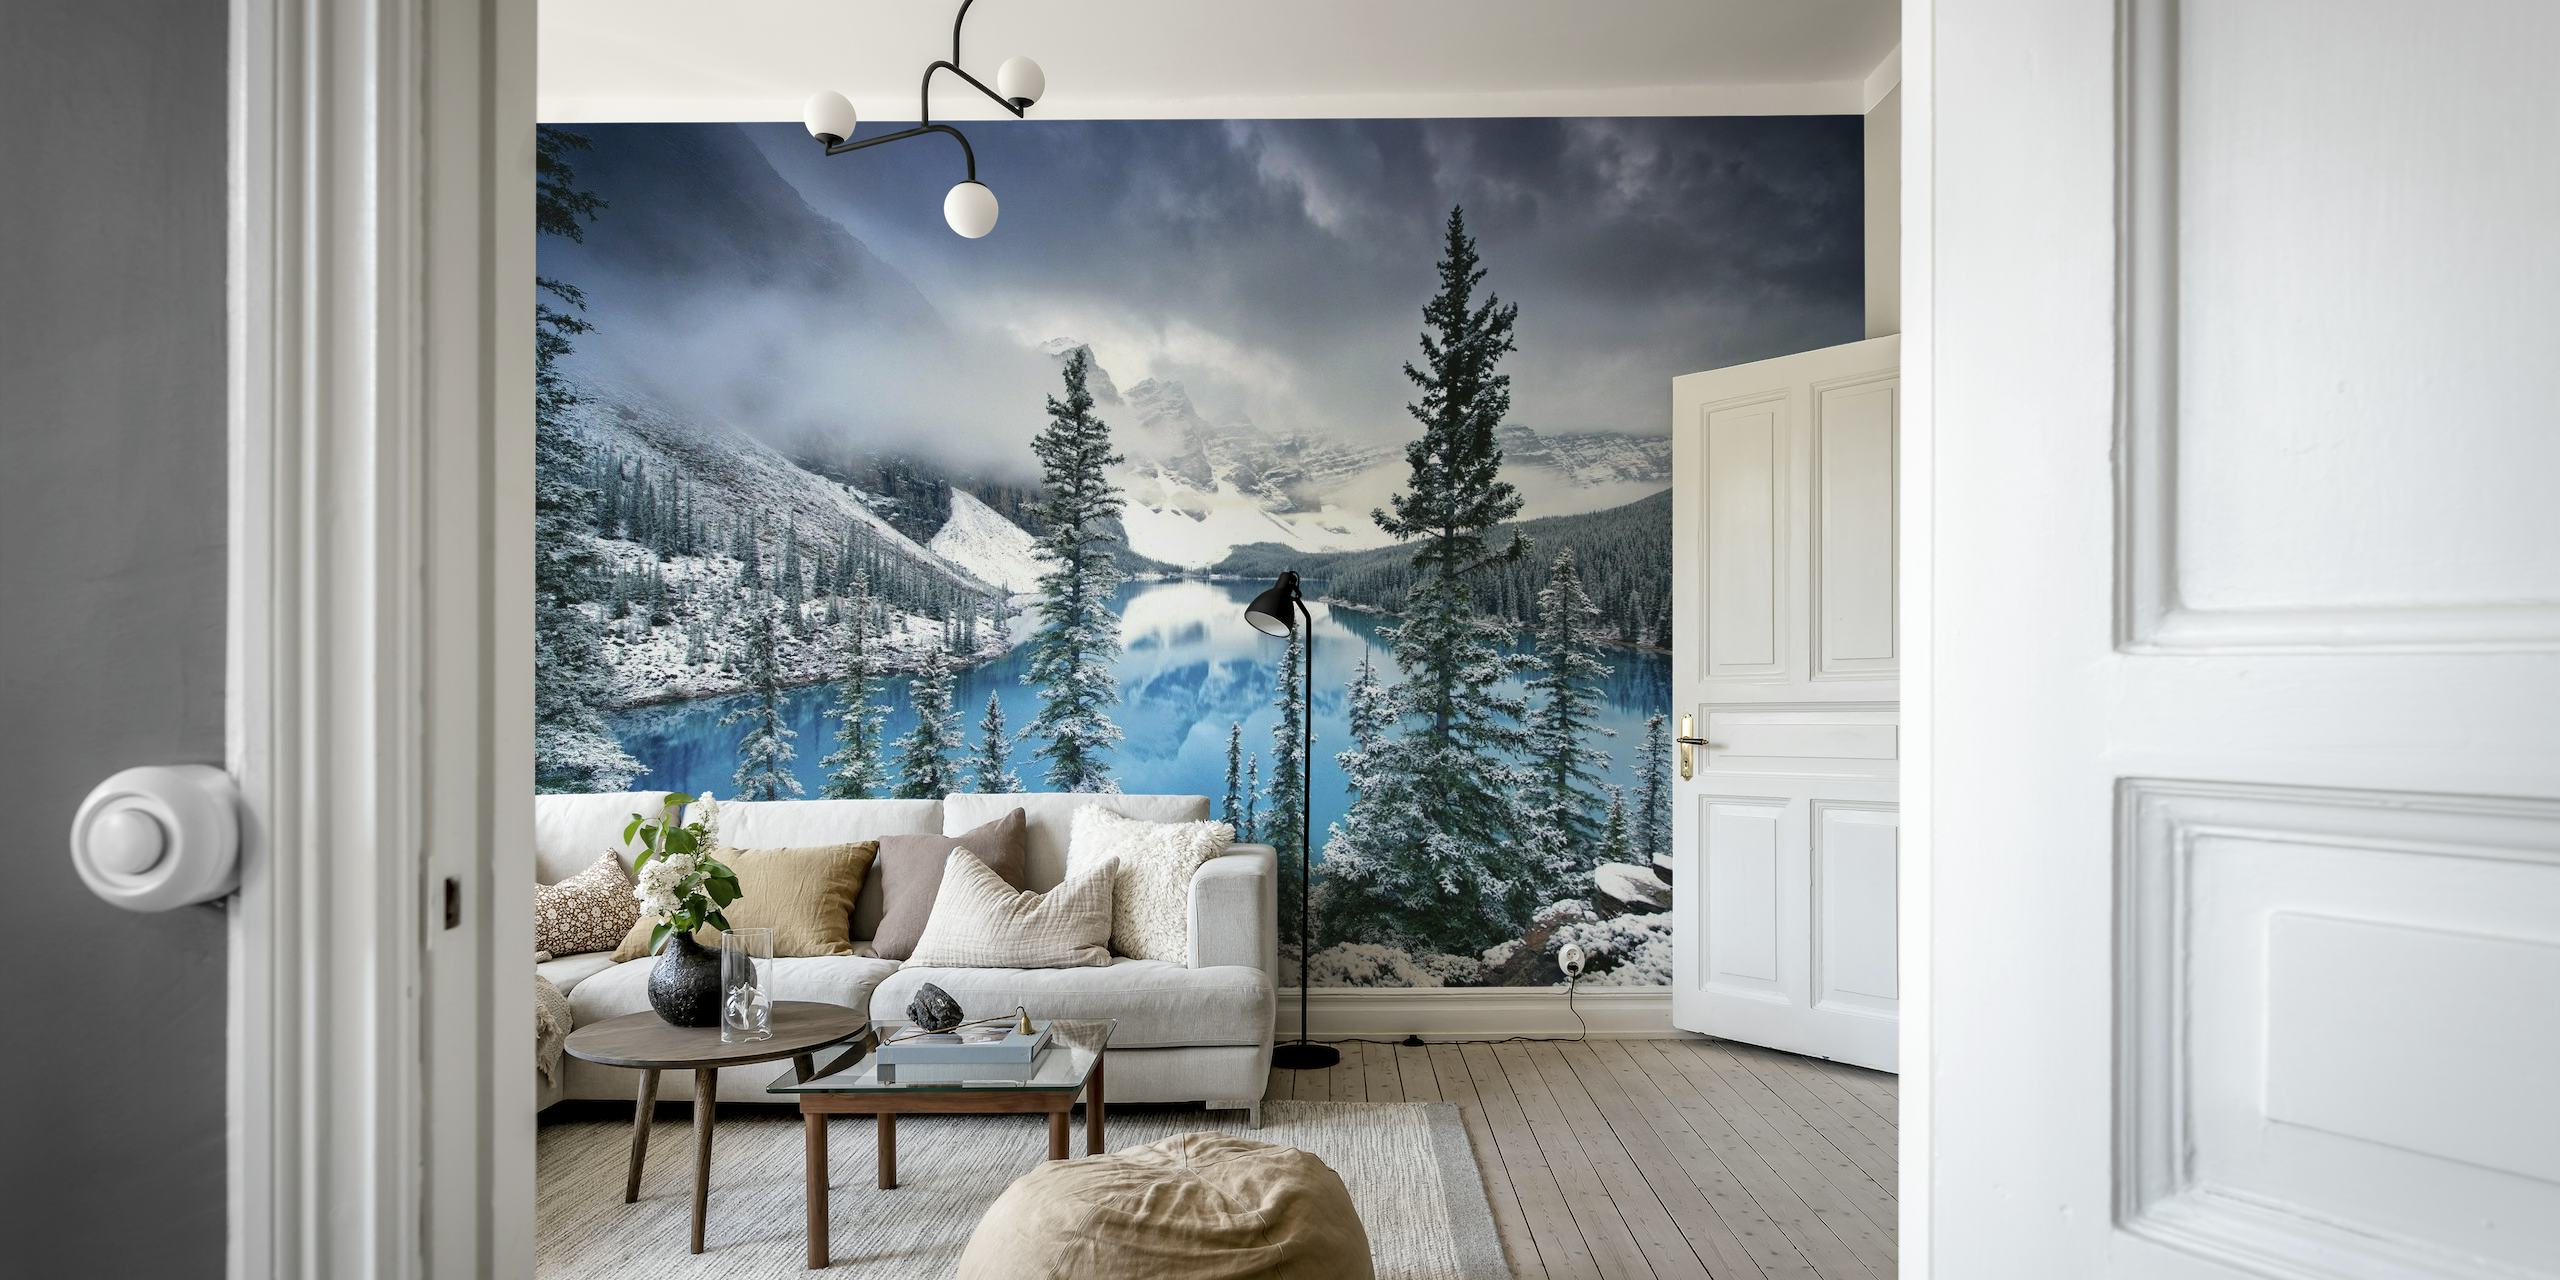 Morning Blues wall mural featuring a snow-covered landscape with frosty trees and a reflective lake under a dawn-tinted sky.